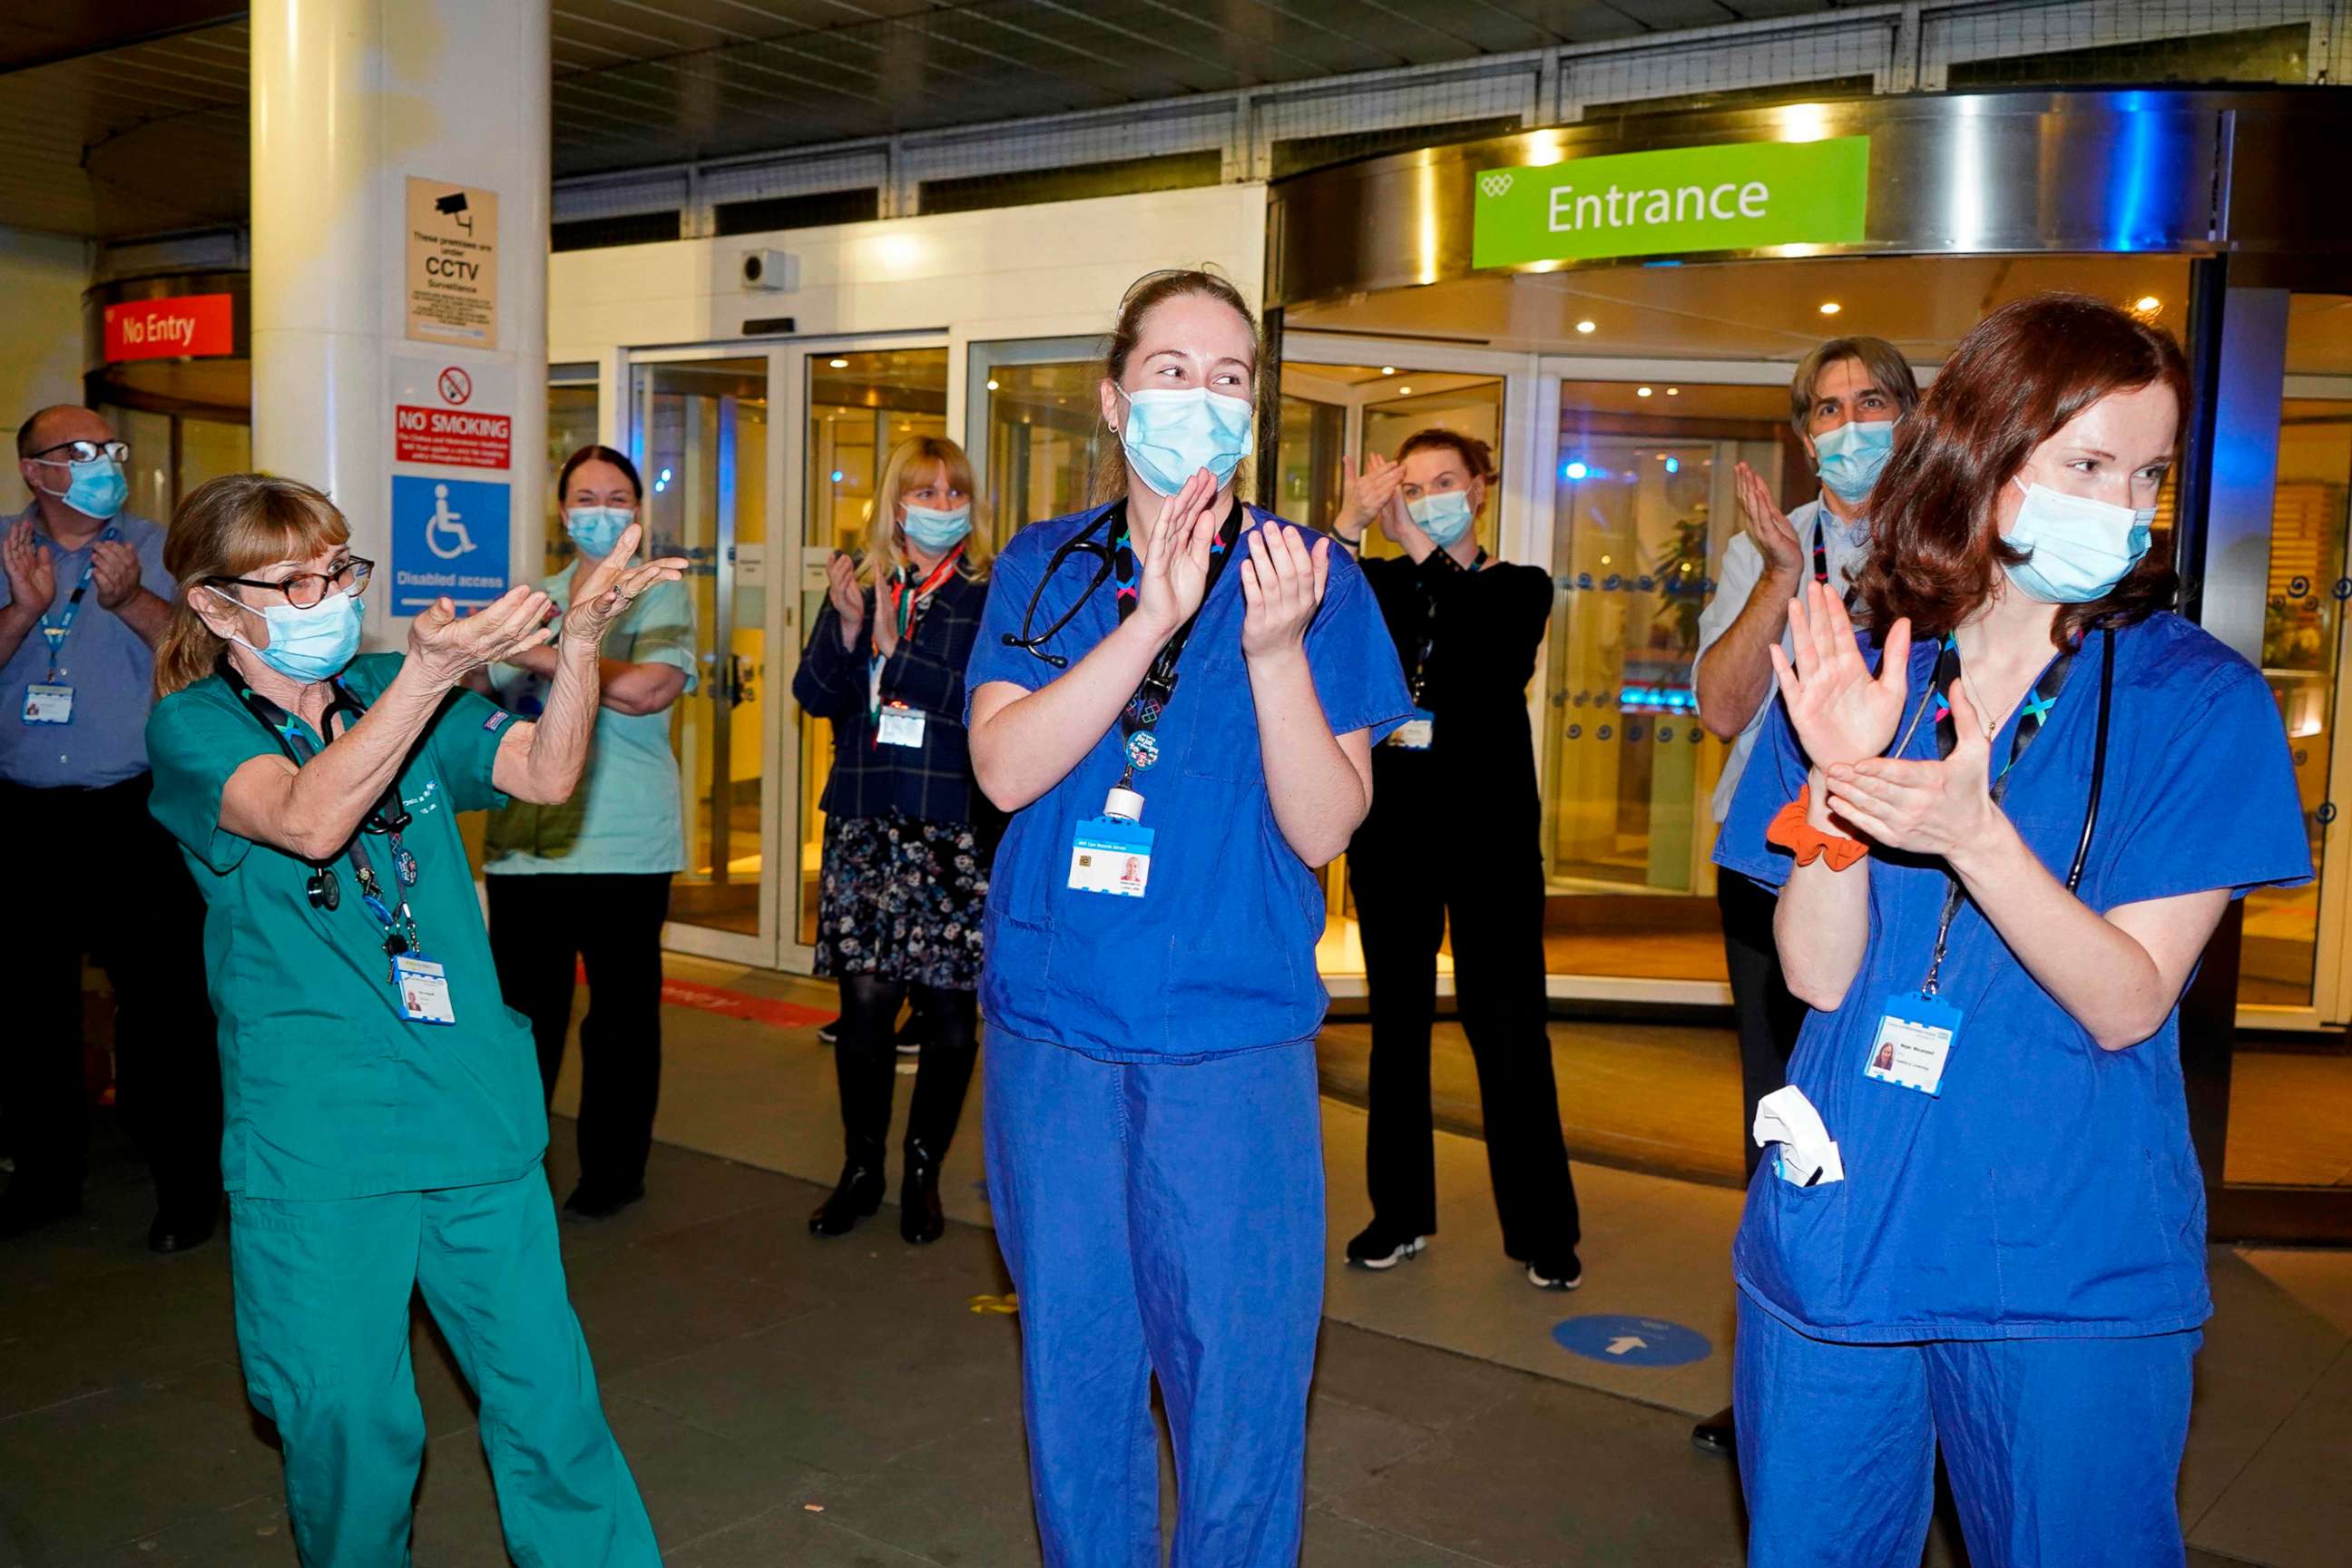 PHOTO: Members of staff at the Chelsea and Westminster Hospital take part in the Clap for Captain Tom Moore on Feb. 3, 2021 following his death and NHS staff.